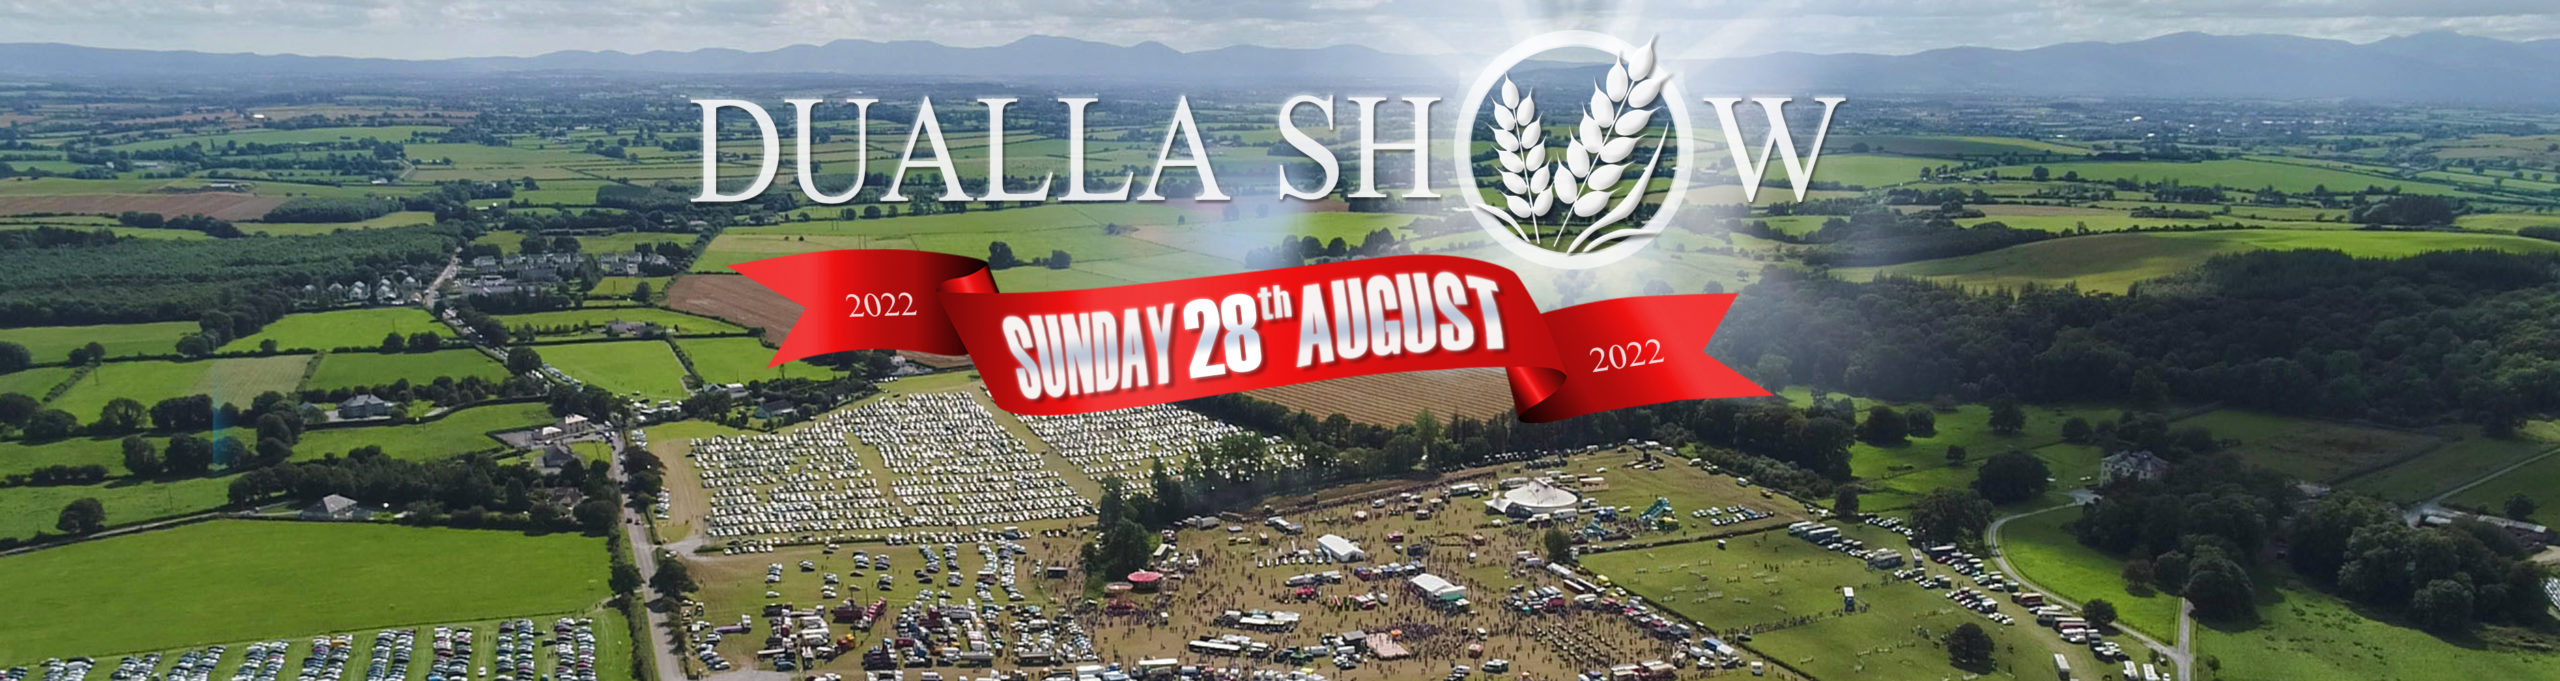 Dualla Show 2022 - Sunday 28th August